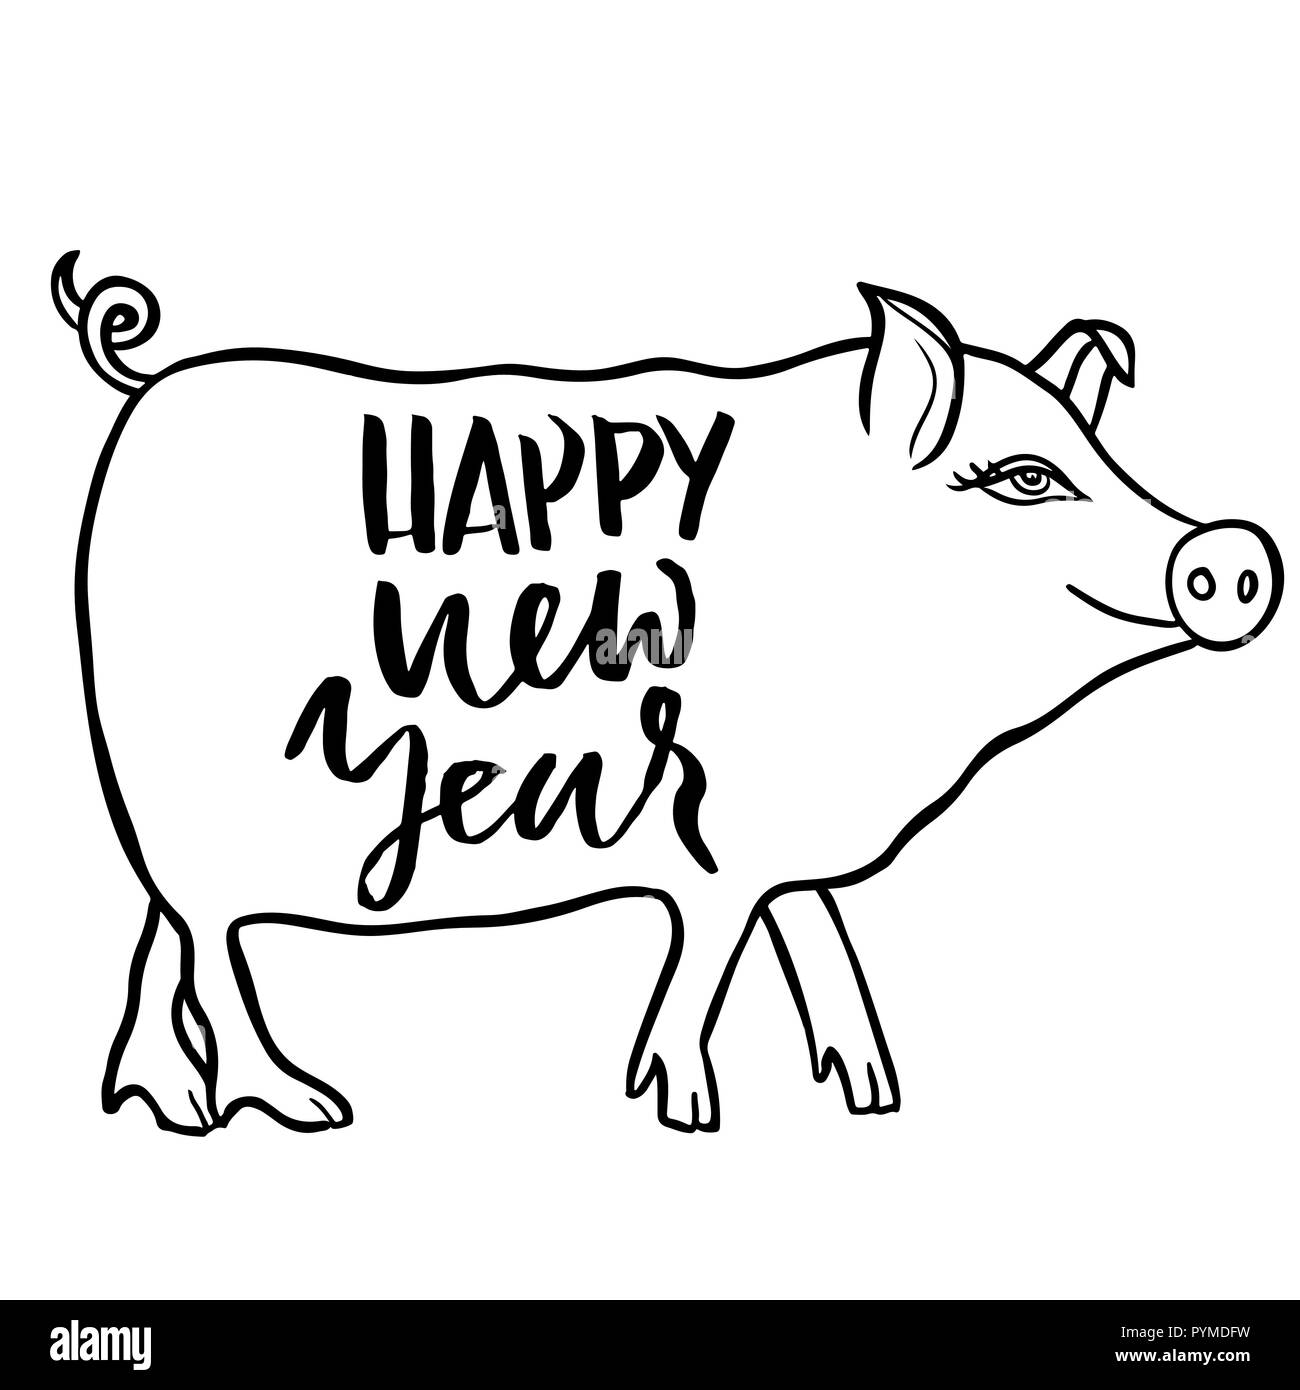 Asian new year sign. Funny pig. Happy new year. Vector illustration. Stock Vector